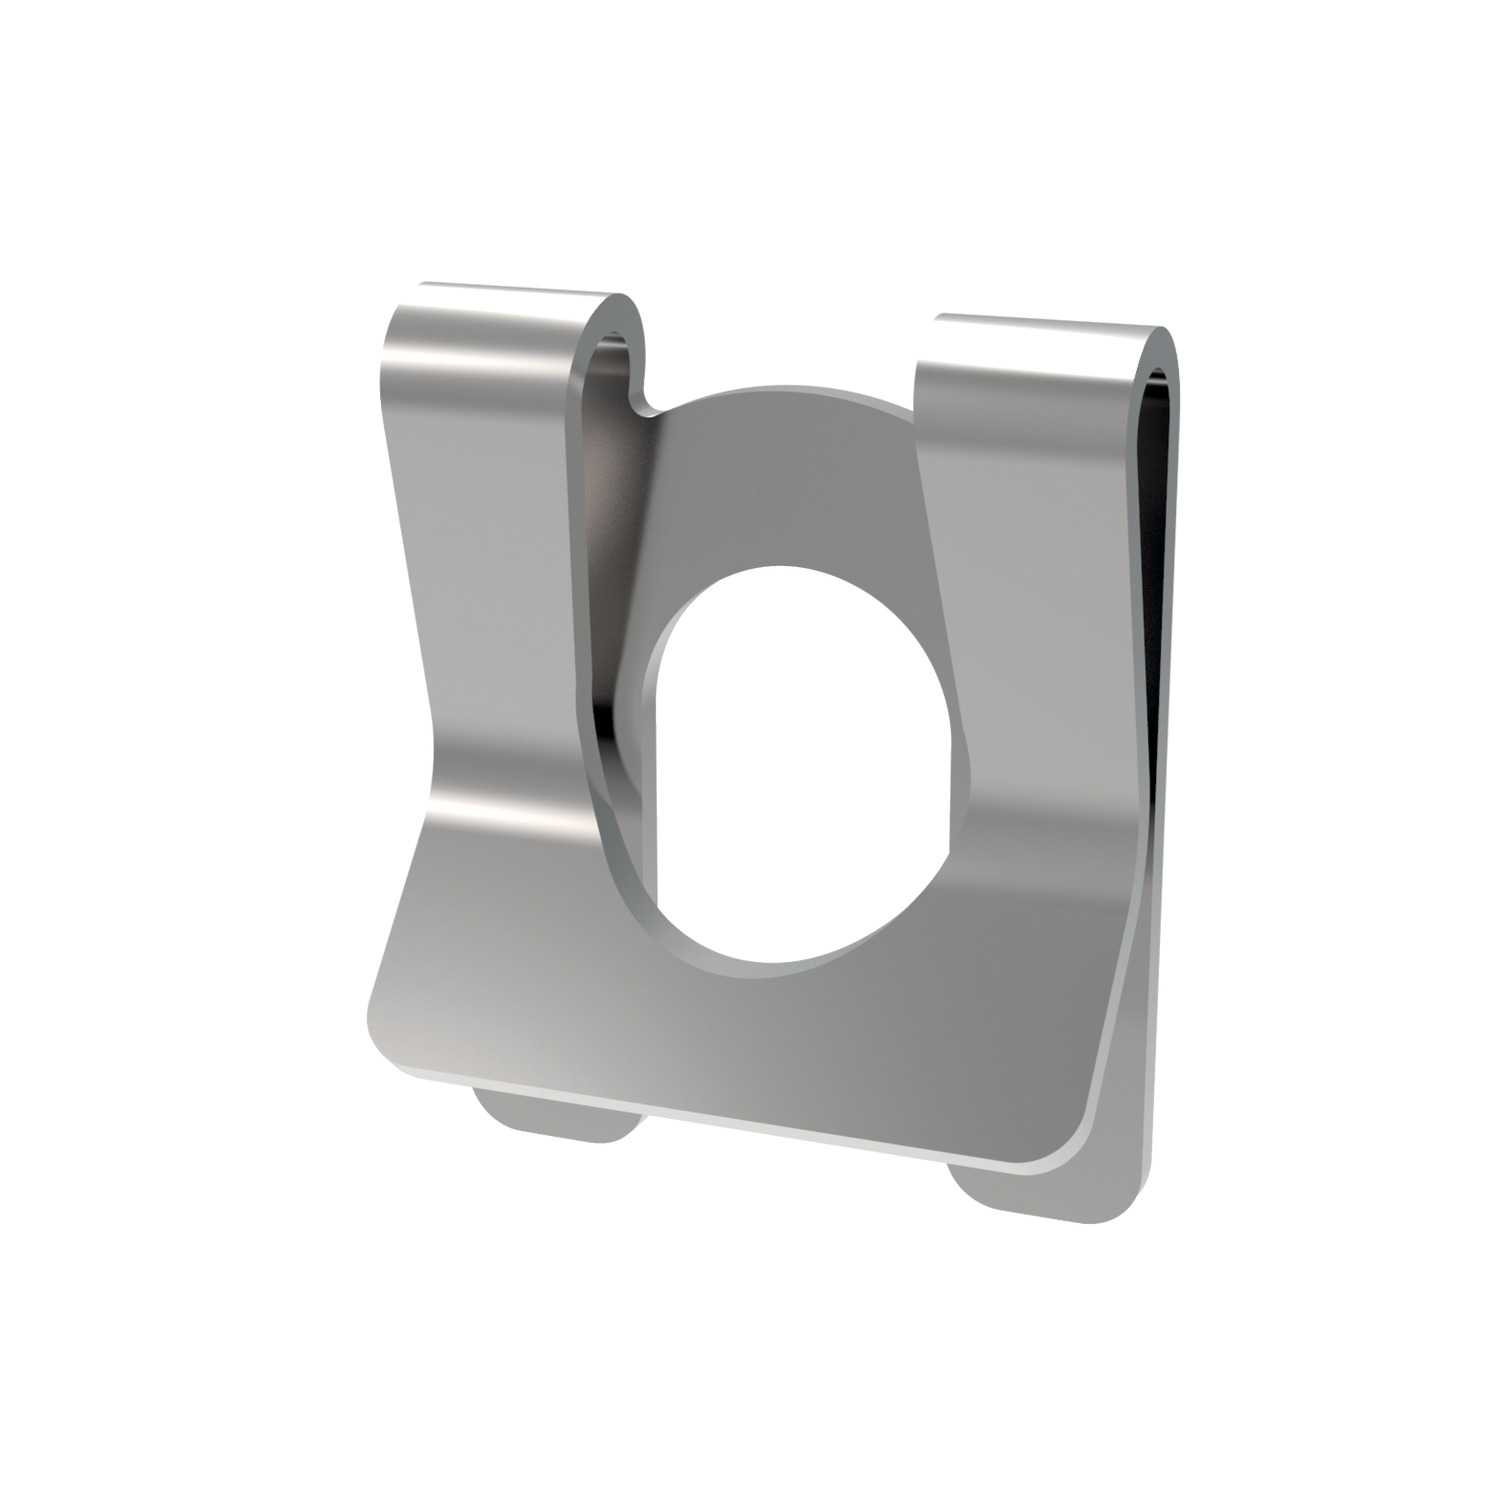 Safety Fastener (SLM) Silver zinc-plated safety fastener. Easily assemble and remove by hand without special tools. Compatible with clevis 